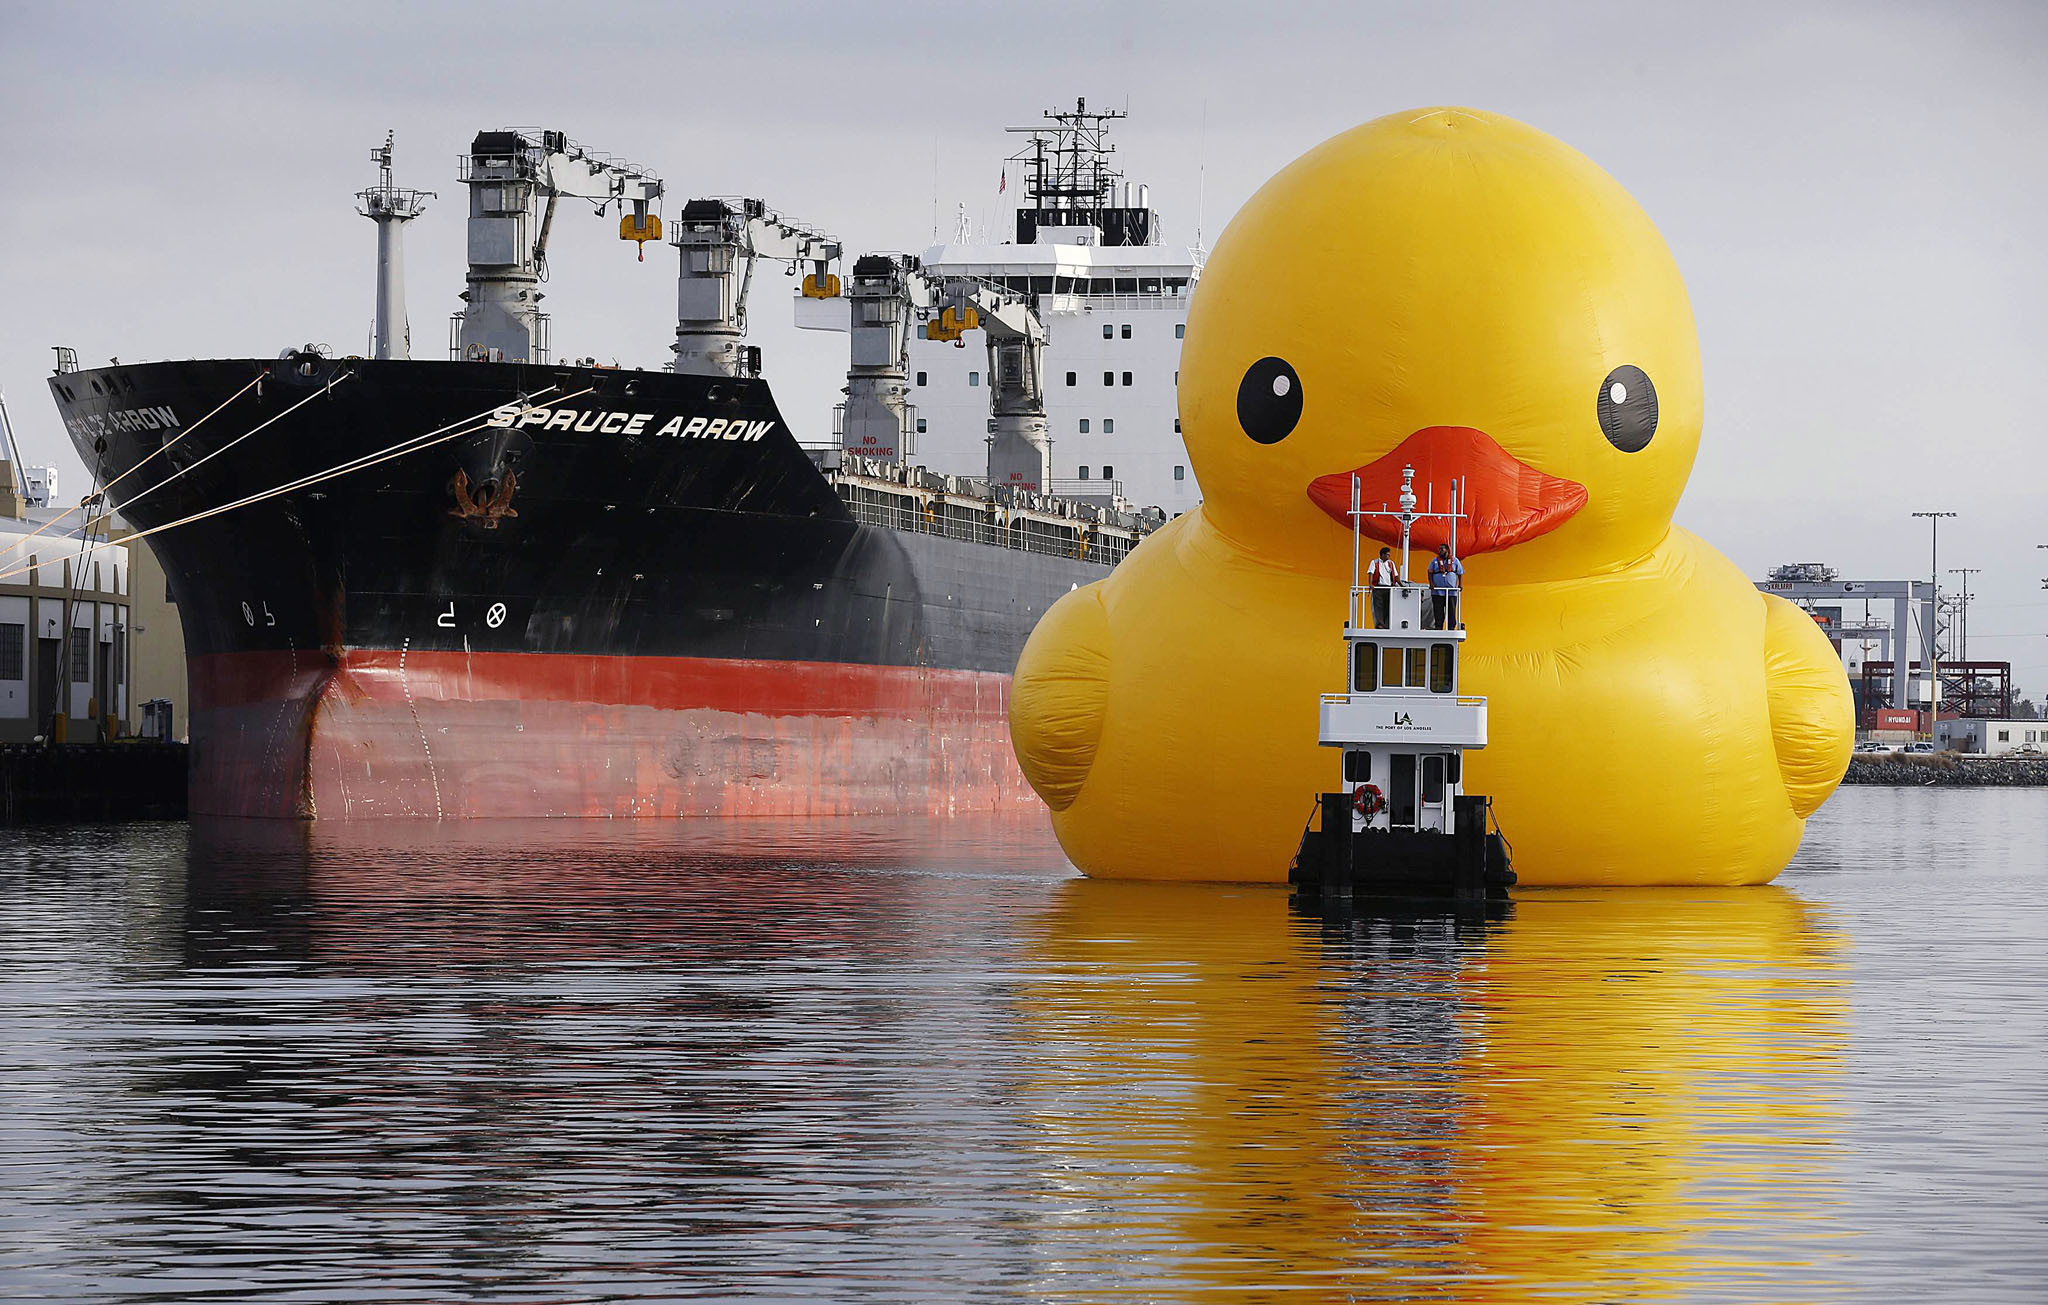 2048x1305 Giant rubber duck floats around the world - photo#3